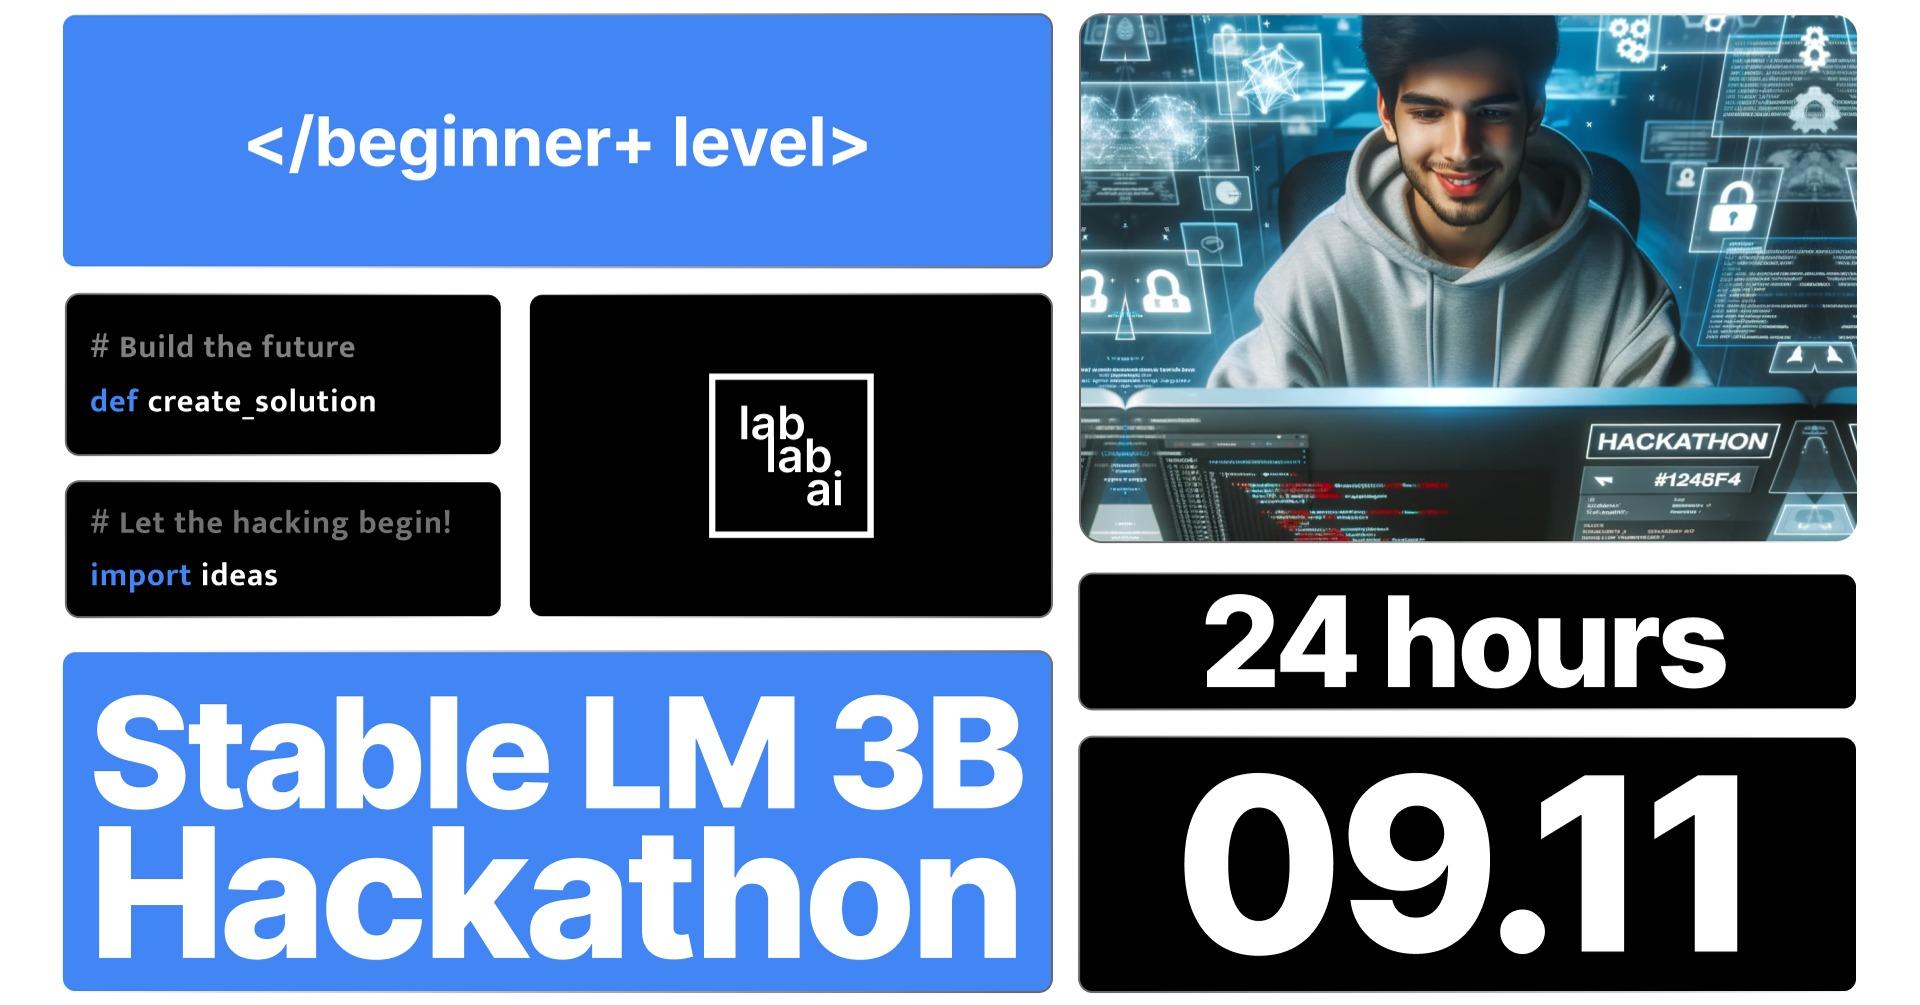 Stable LM 3B 24-hours Hackathon image